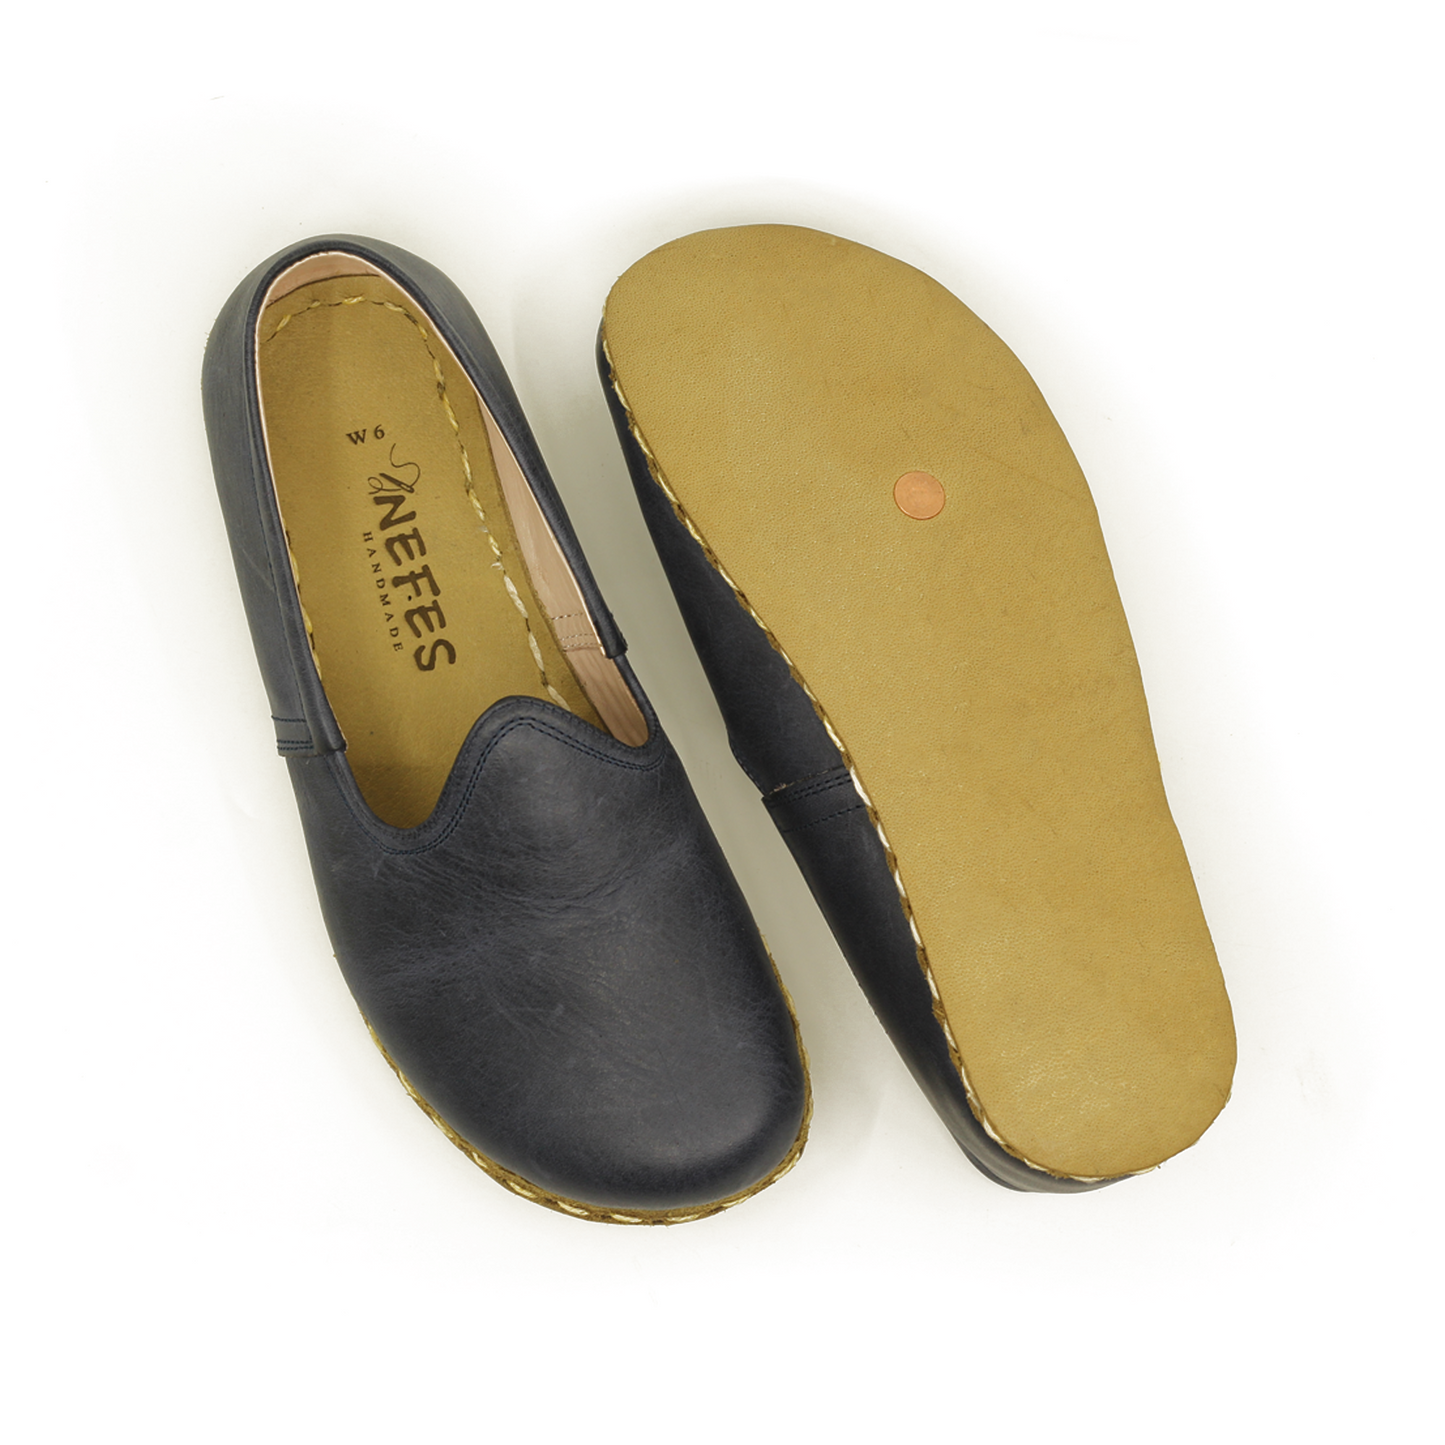 Handmade Women's Shoes: Navy Blue Genuine Leather with Wide Front and Buffalo Leather Sole - Made in Turkey